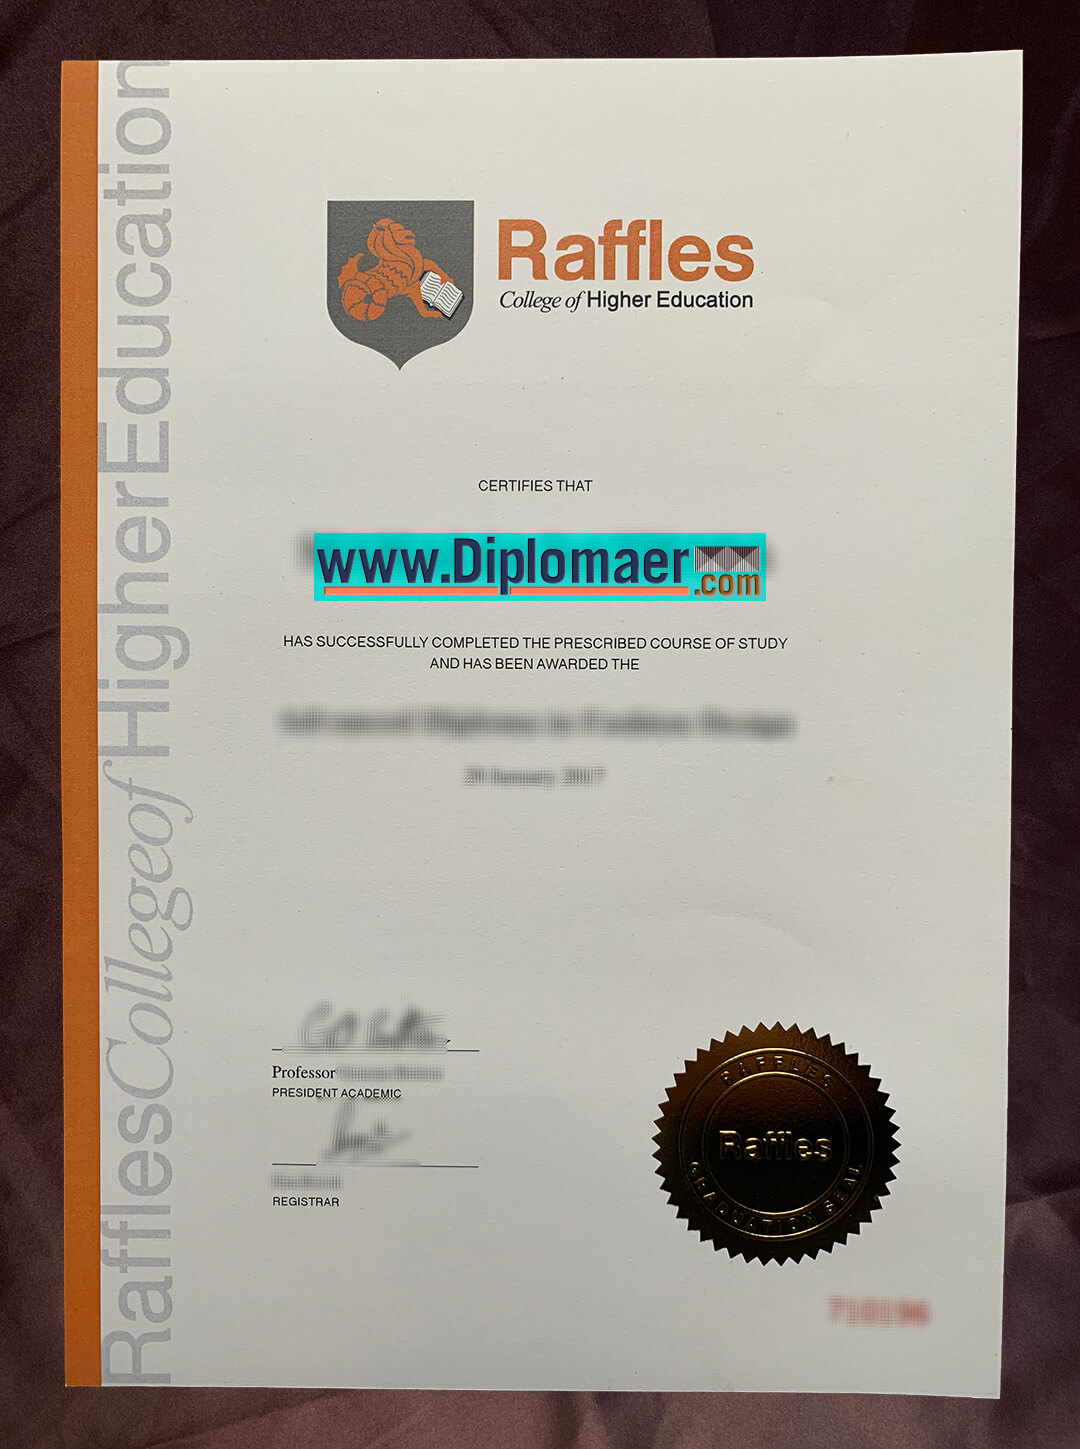 Raffles College of Higher Education fake diploma - Which site provides the best quality Raffles College of Higher Education fake diplomas?